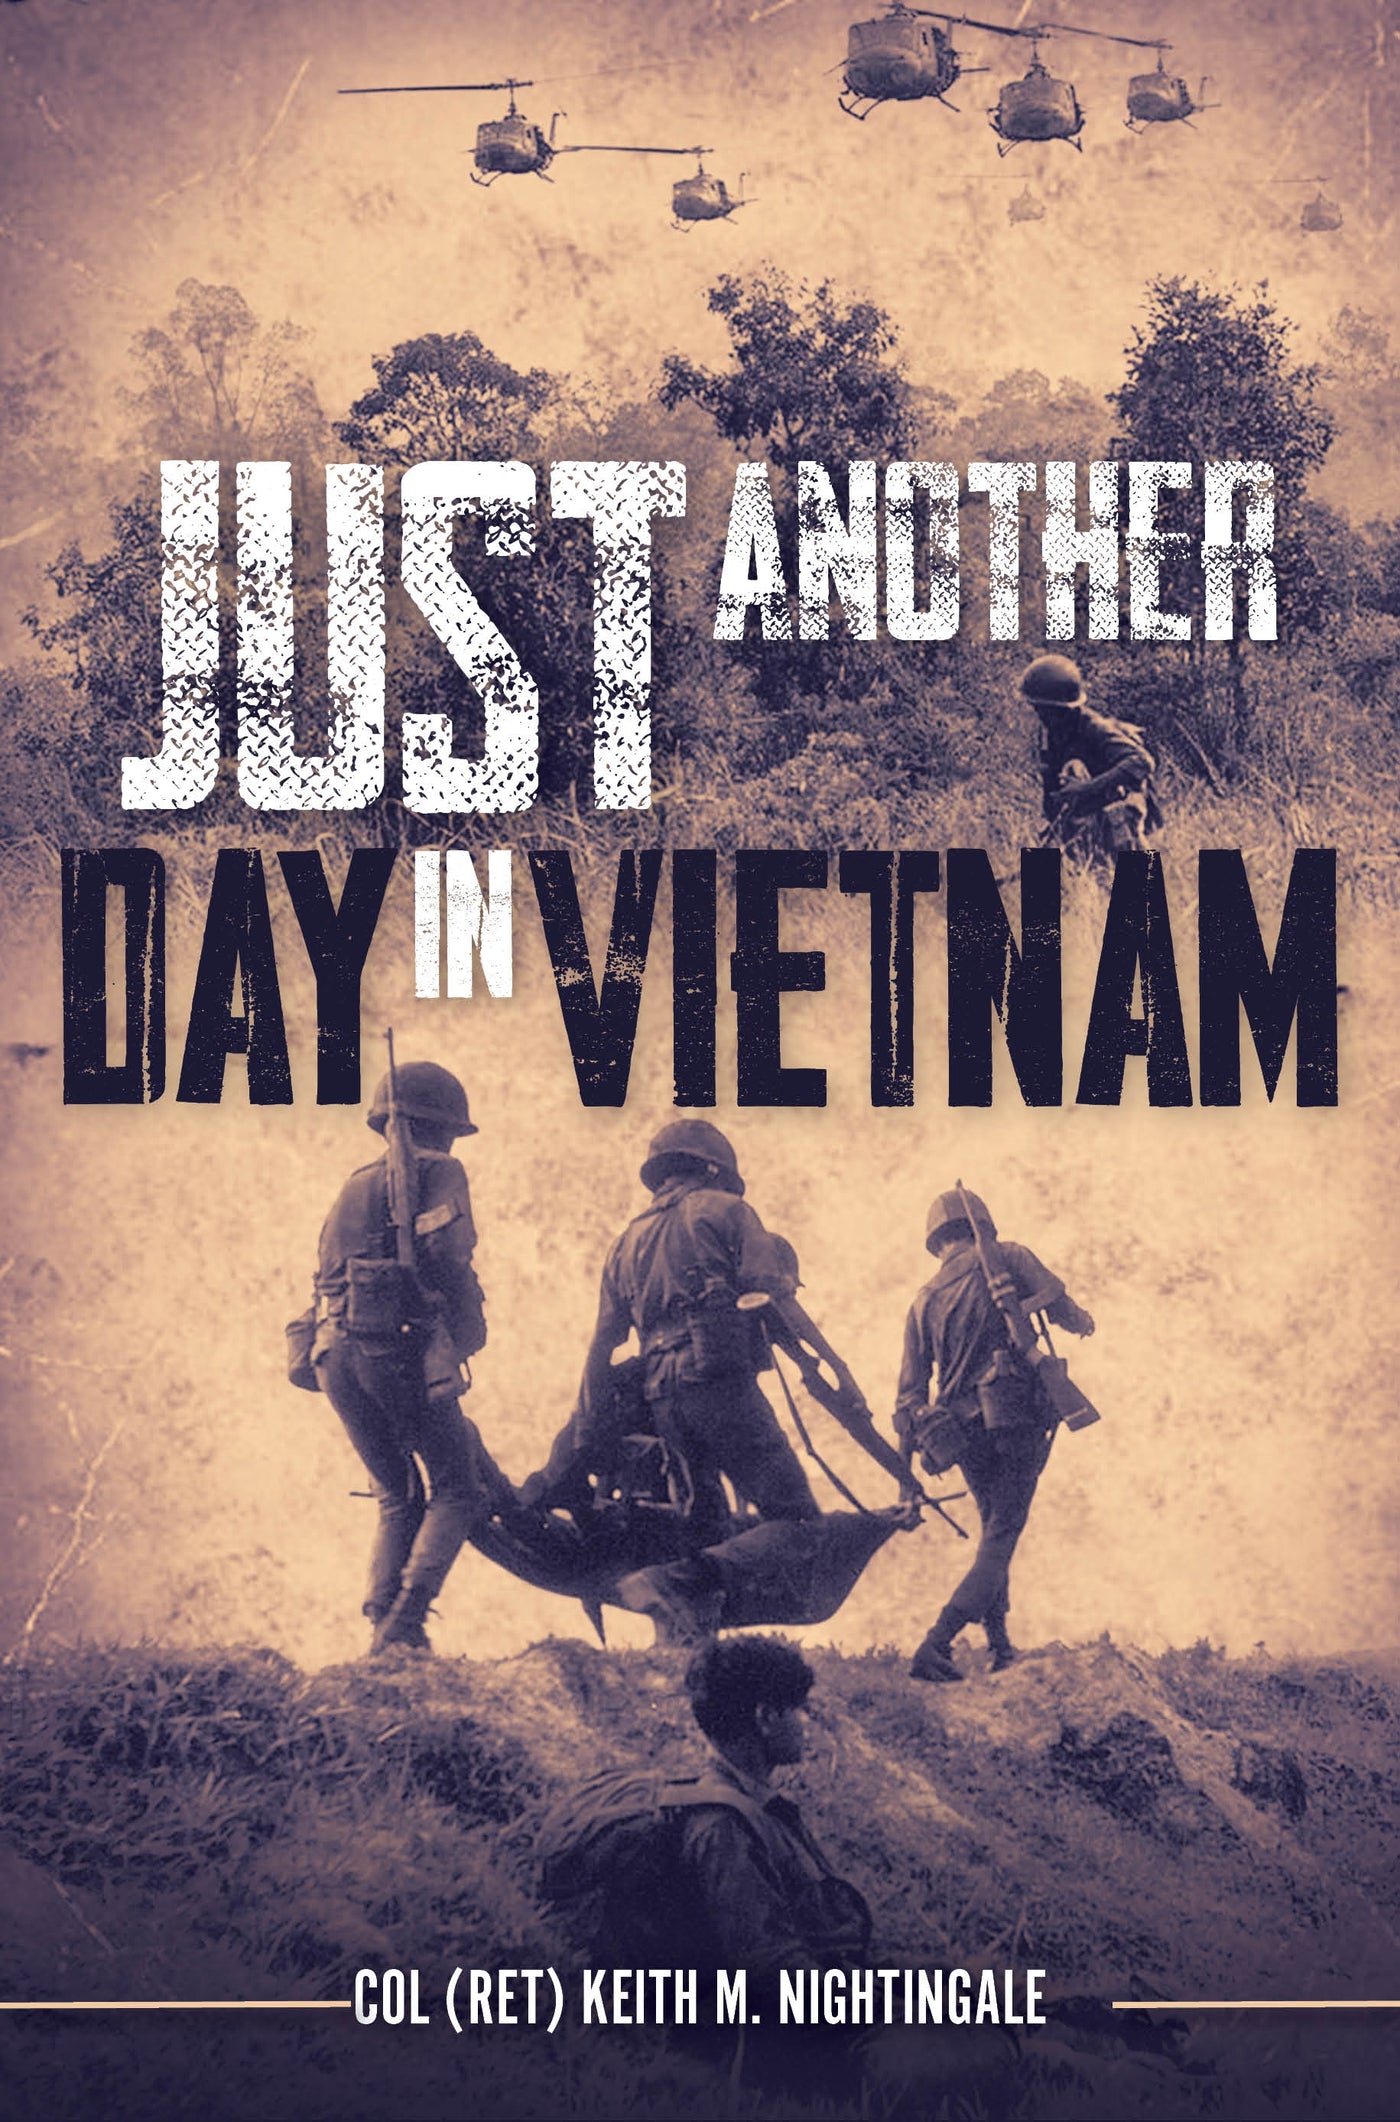 Just Another Day in Vietnam